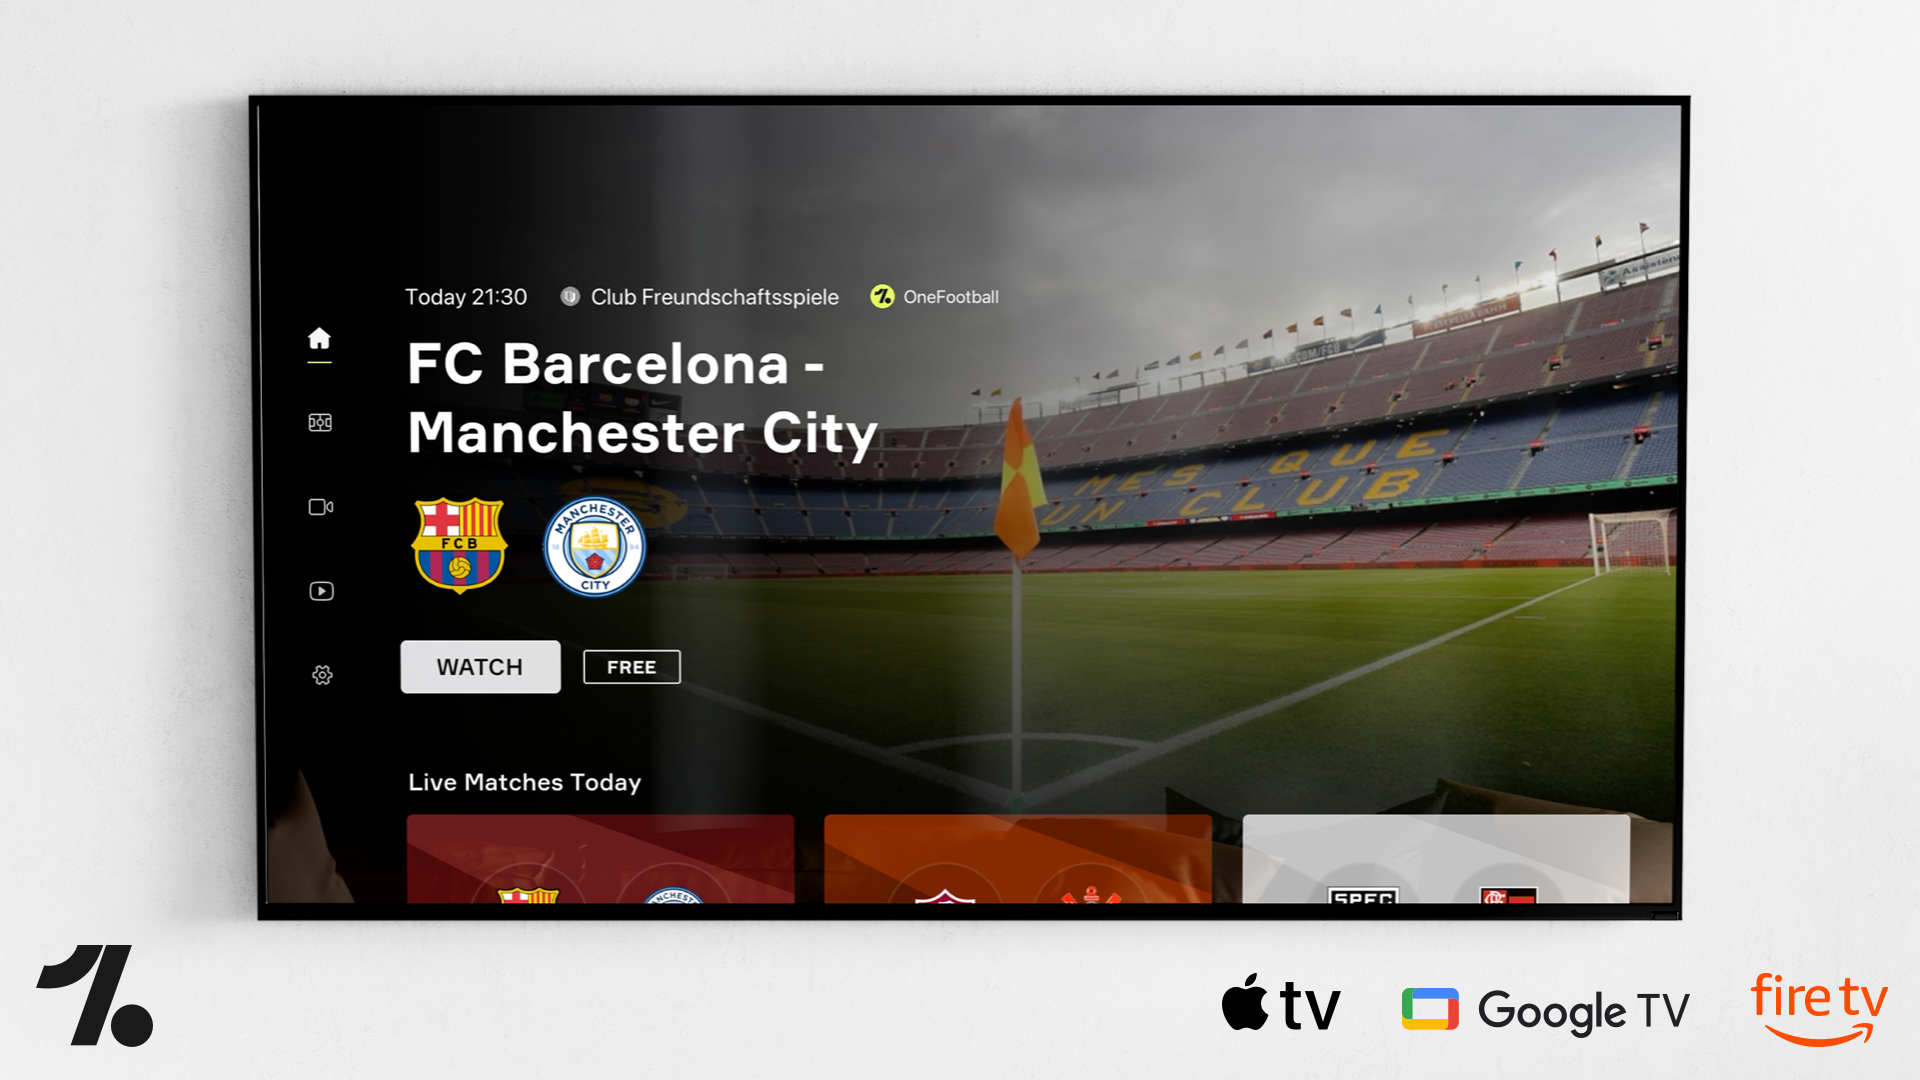 OneFootball announce connected TV app